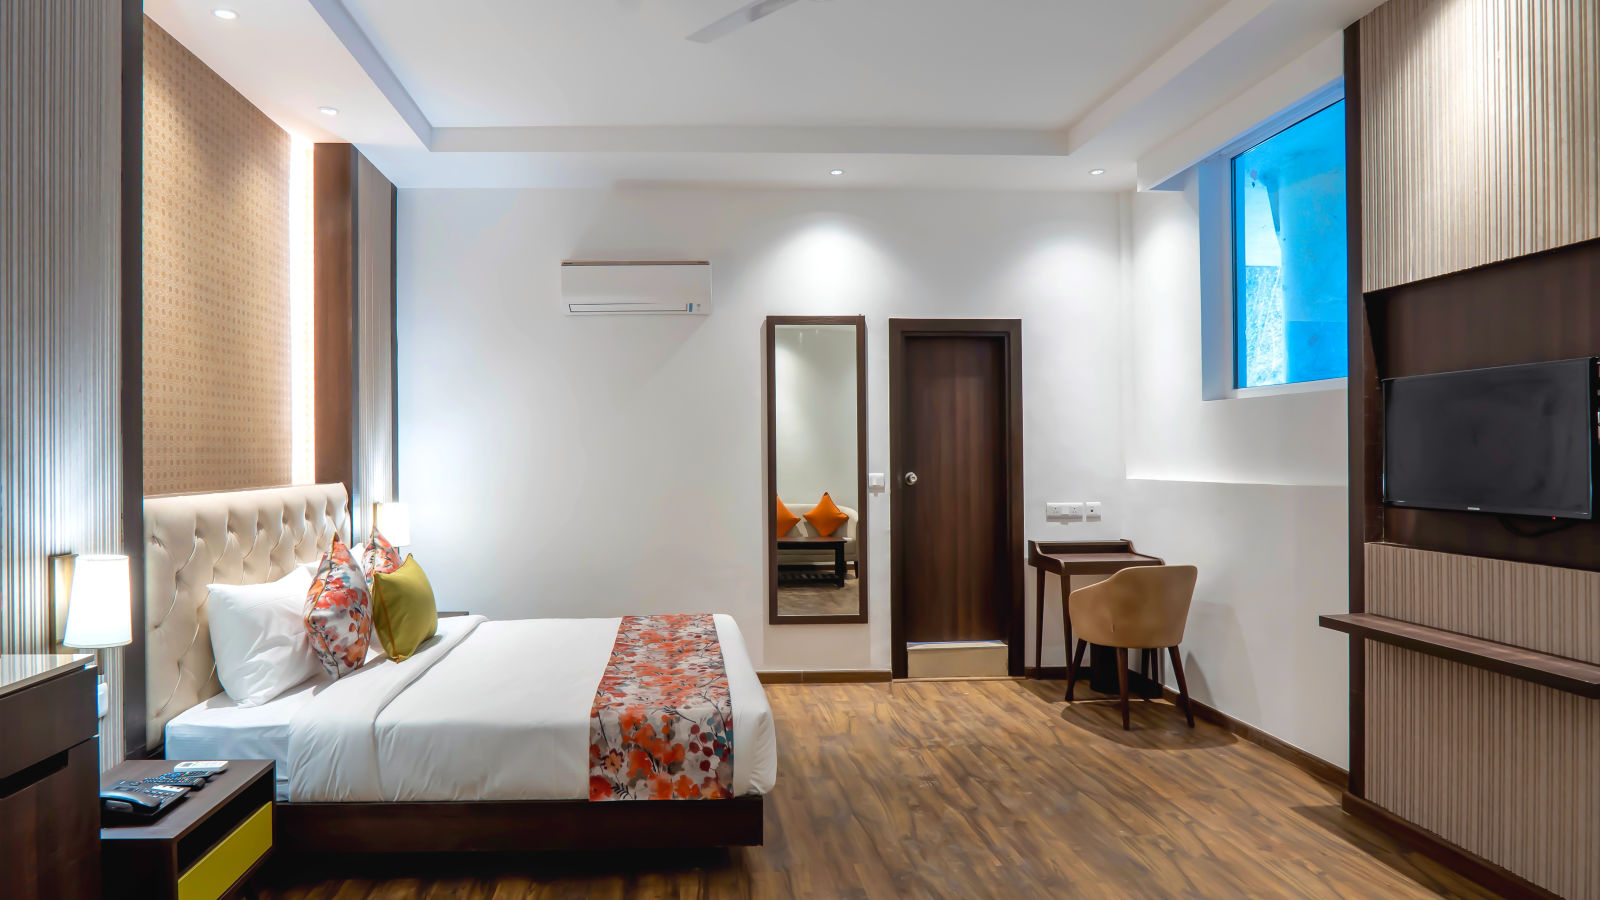 Premium Rooms at Hotel Le ROI Lake View Koti for a cosy stay along with various in-room amenities3